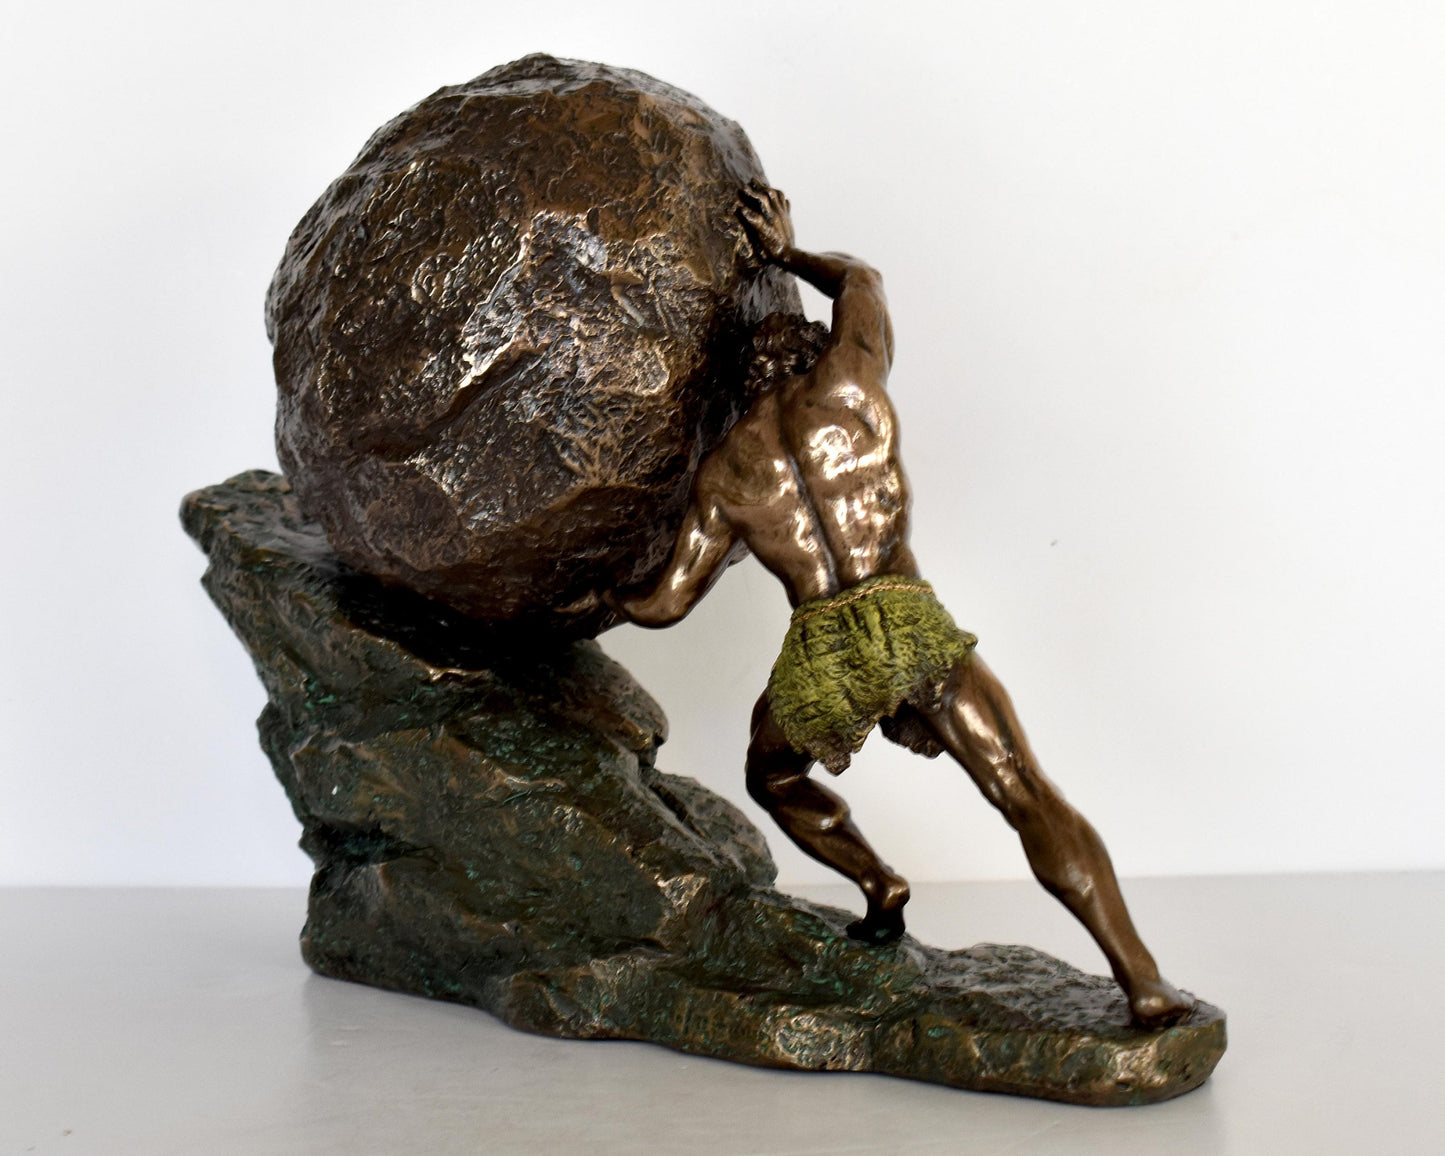 Sisyphus Sisyphos - king of Ephyra Corinth - Hades punished him to roll a boulder up a hill for eternity - Cold Cast Bronze Resin